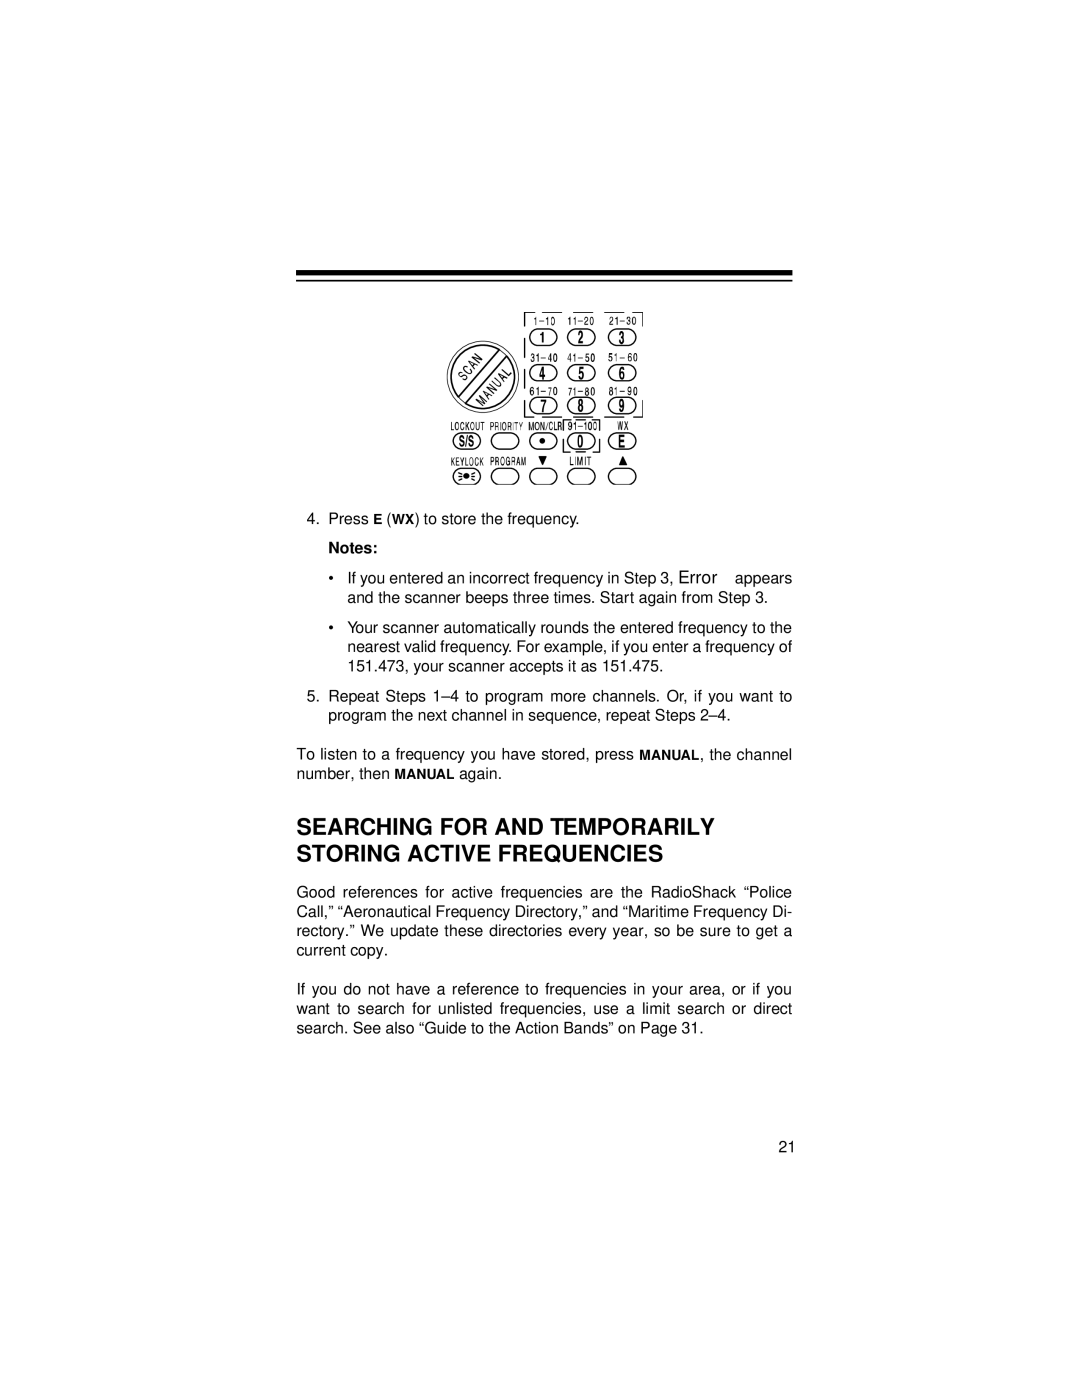 Radio Shack Pro-71 owner manual Searching for and Temporarily Storing Active Frequencies, Press E WX to store the frequency 